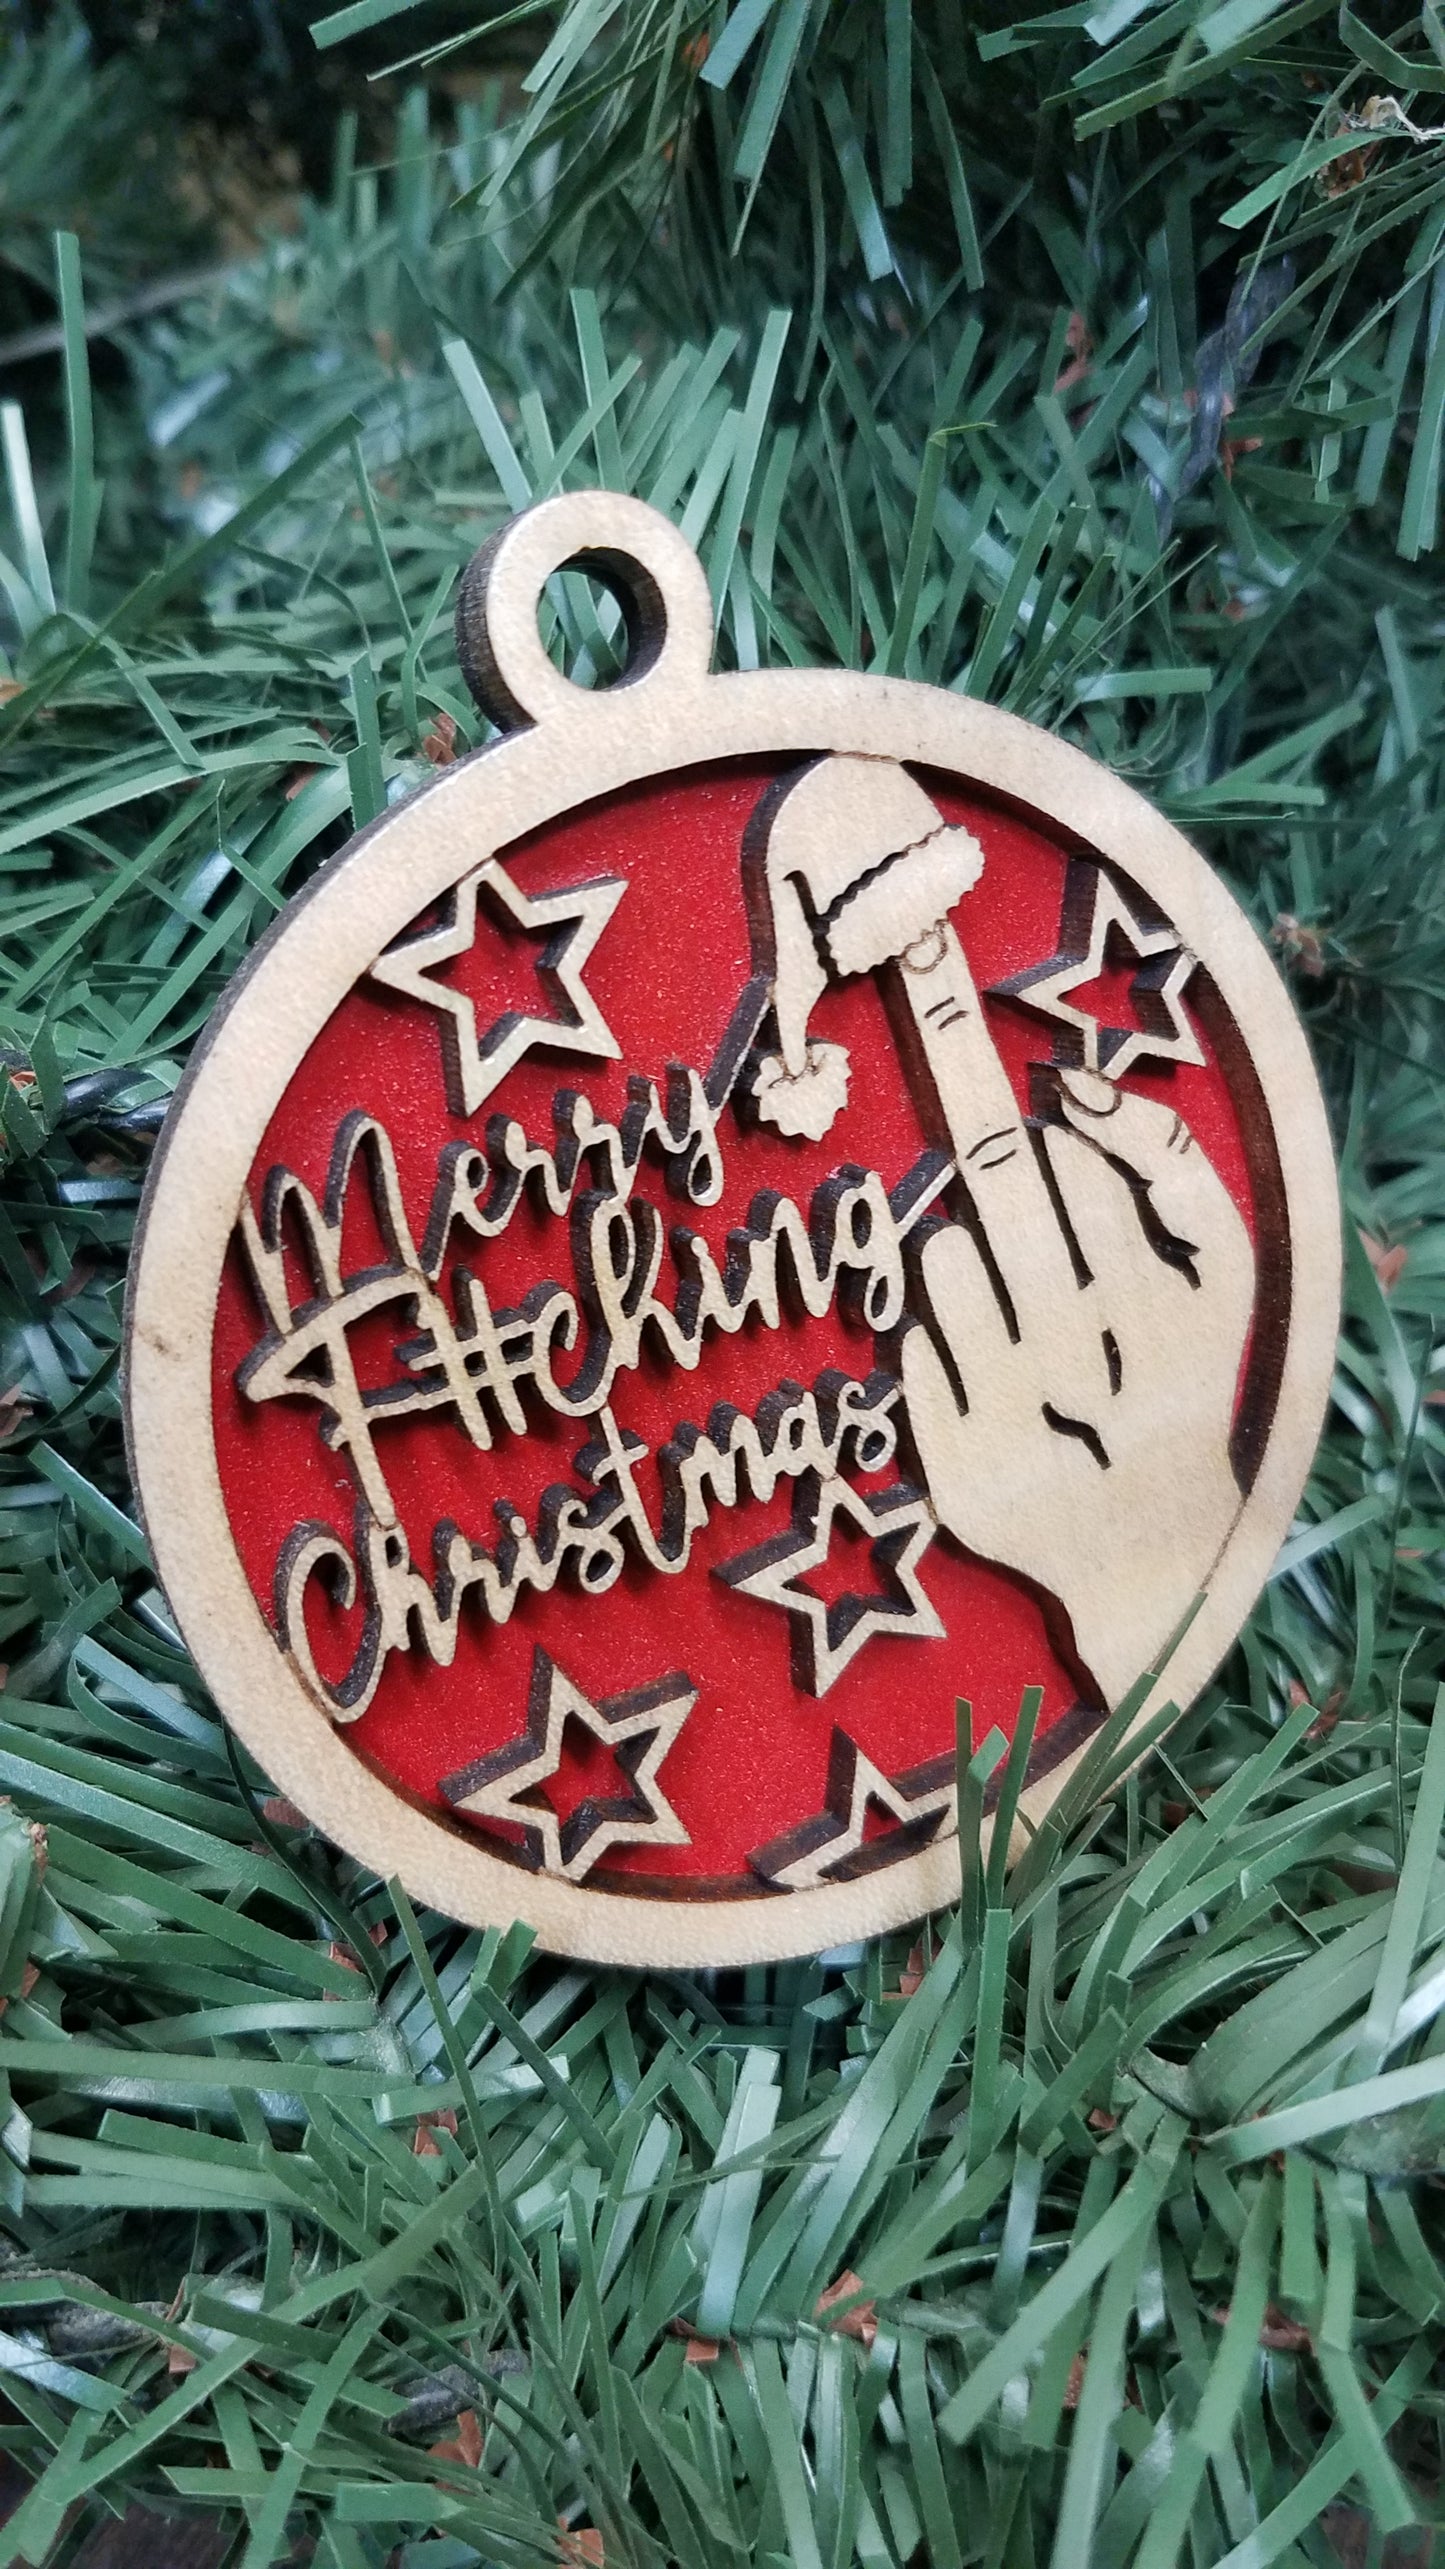 Naughty But Nice- Laser Cut Wooden Ornaments